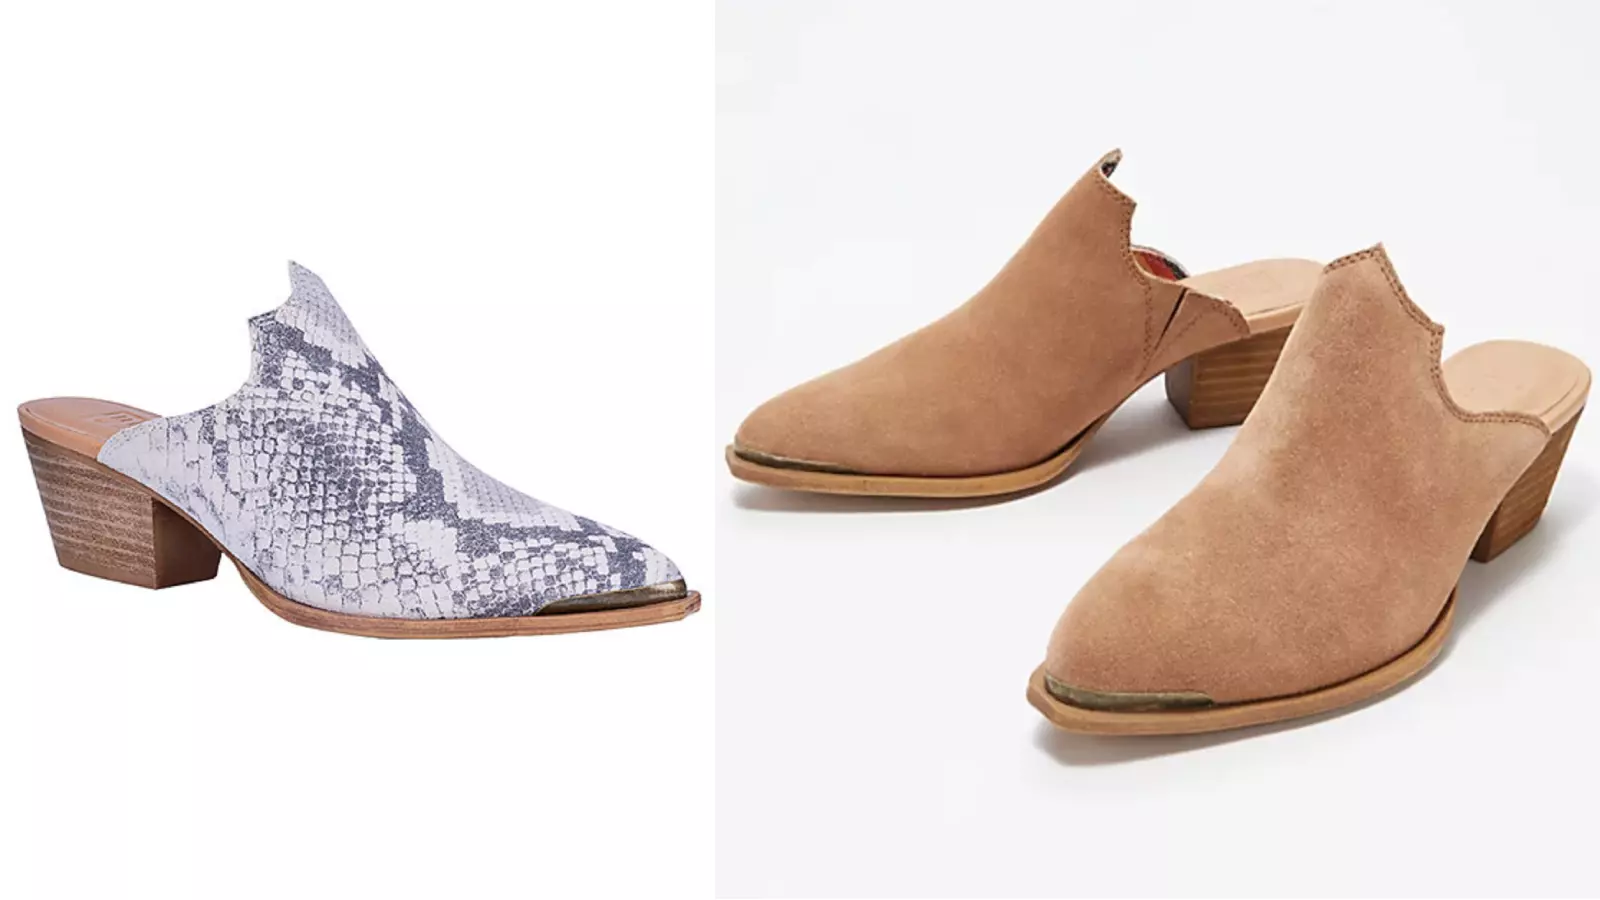 These Free People clogs up the cool factor of any fall get-up.